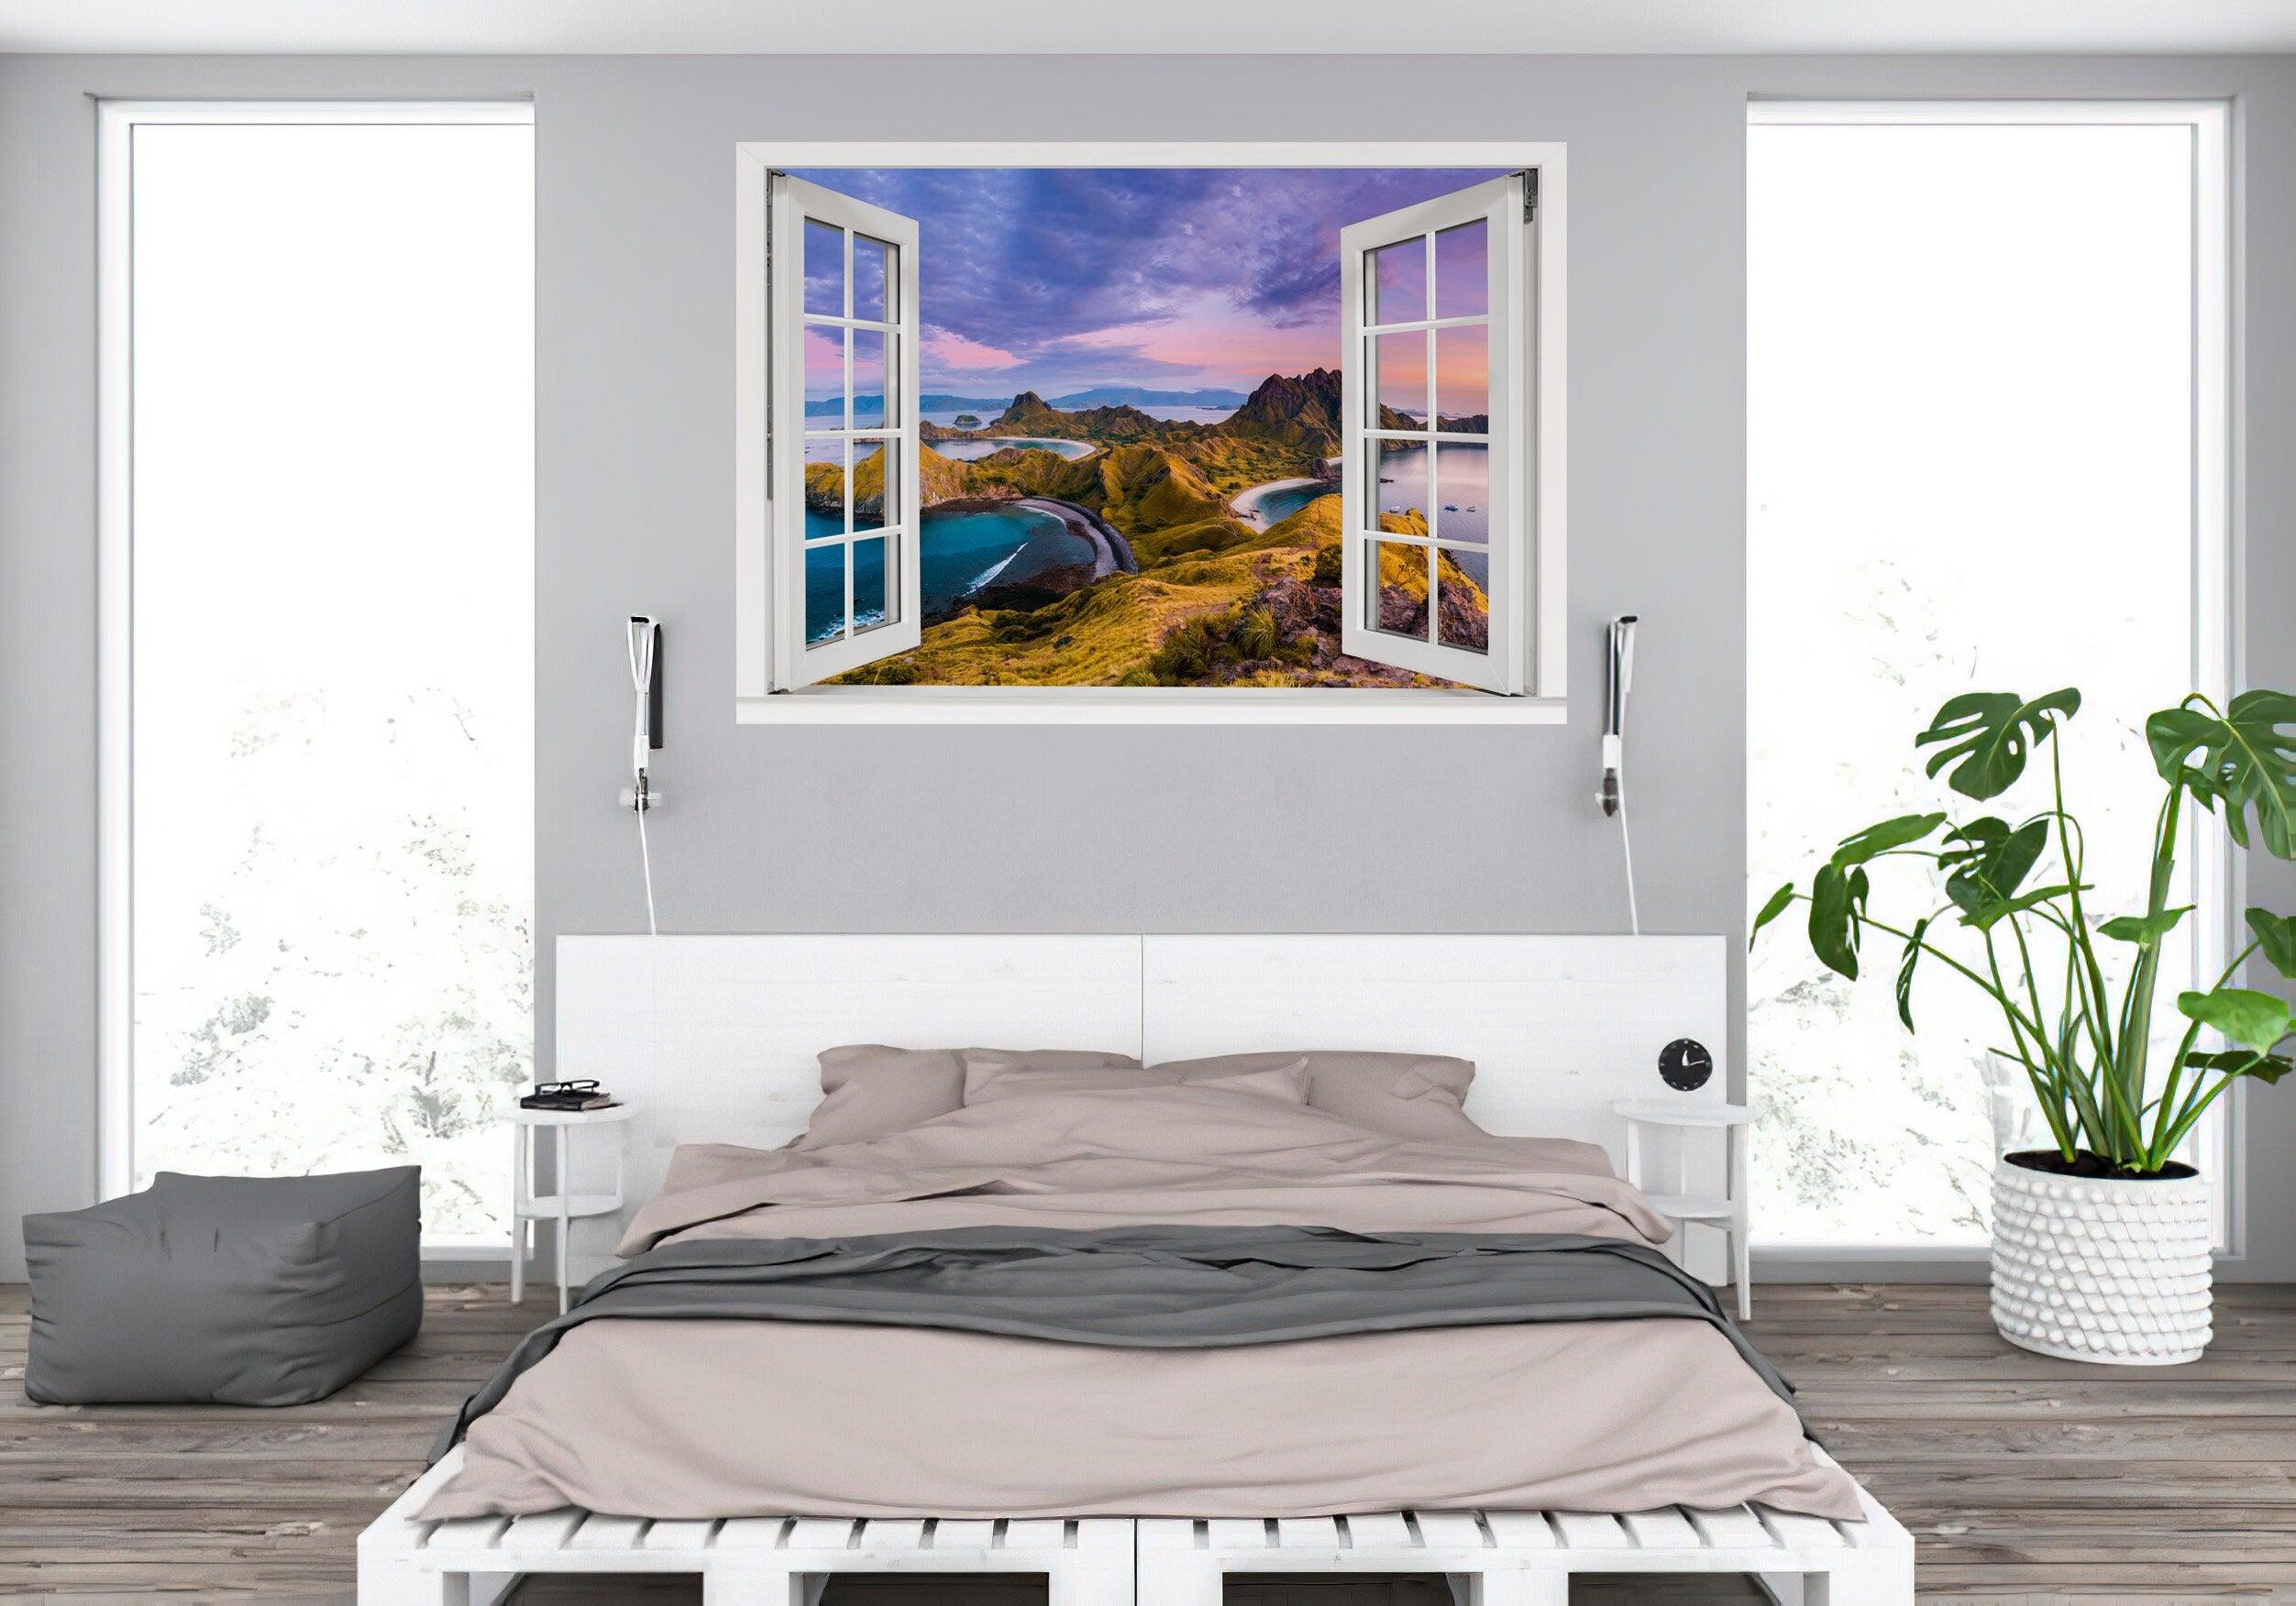 Window Scape Vista #9 Window Decal Sticker Mural Mountain Removable Fabric Window Frame Office Bedroom 3D